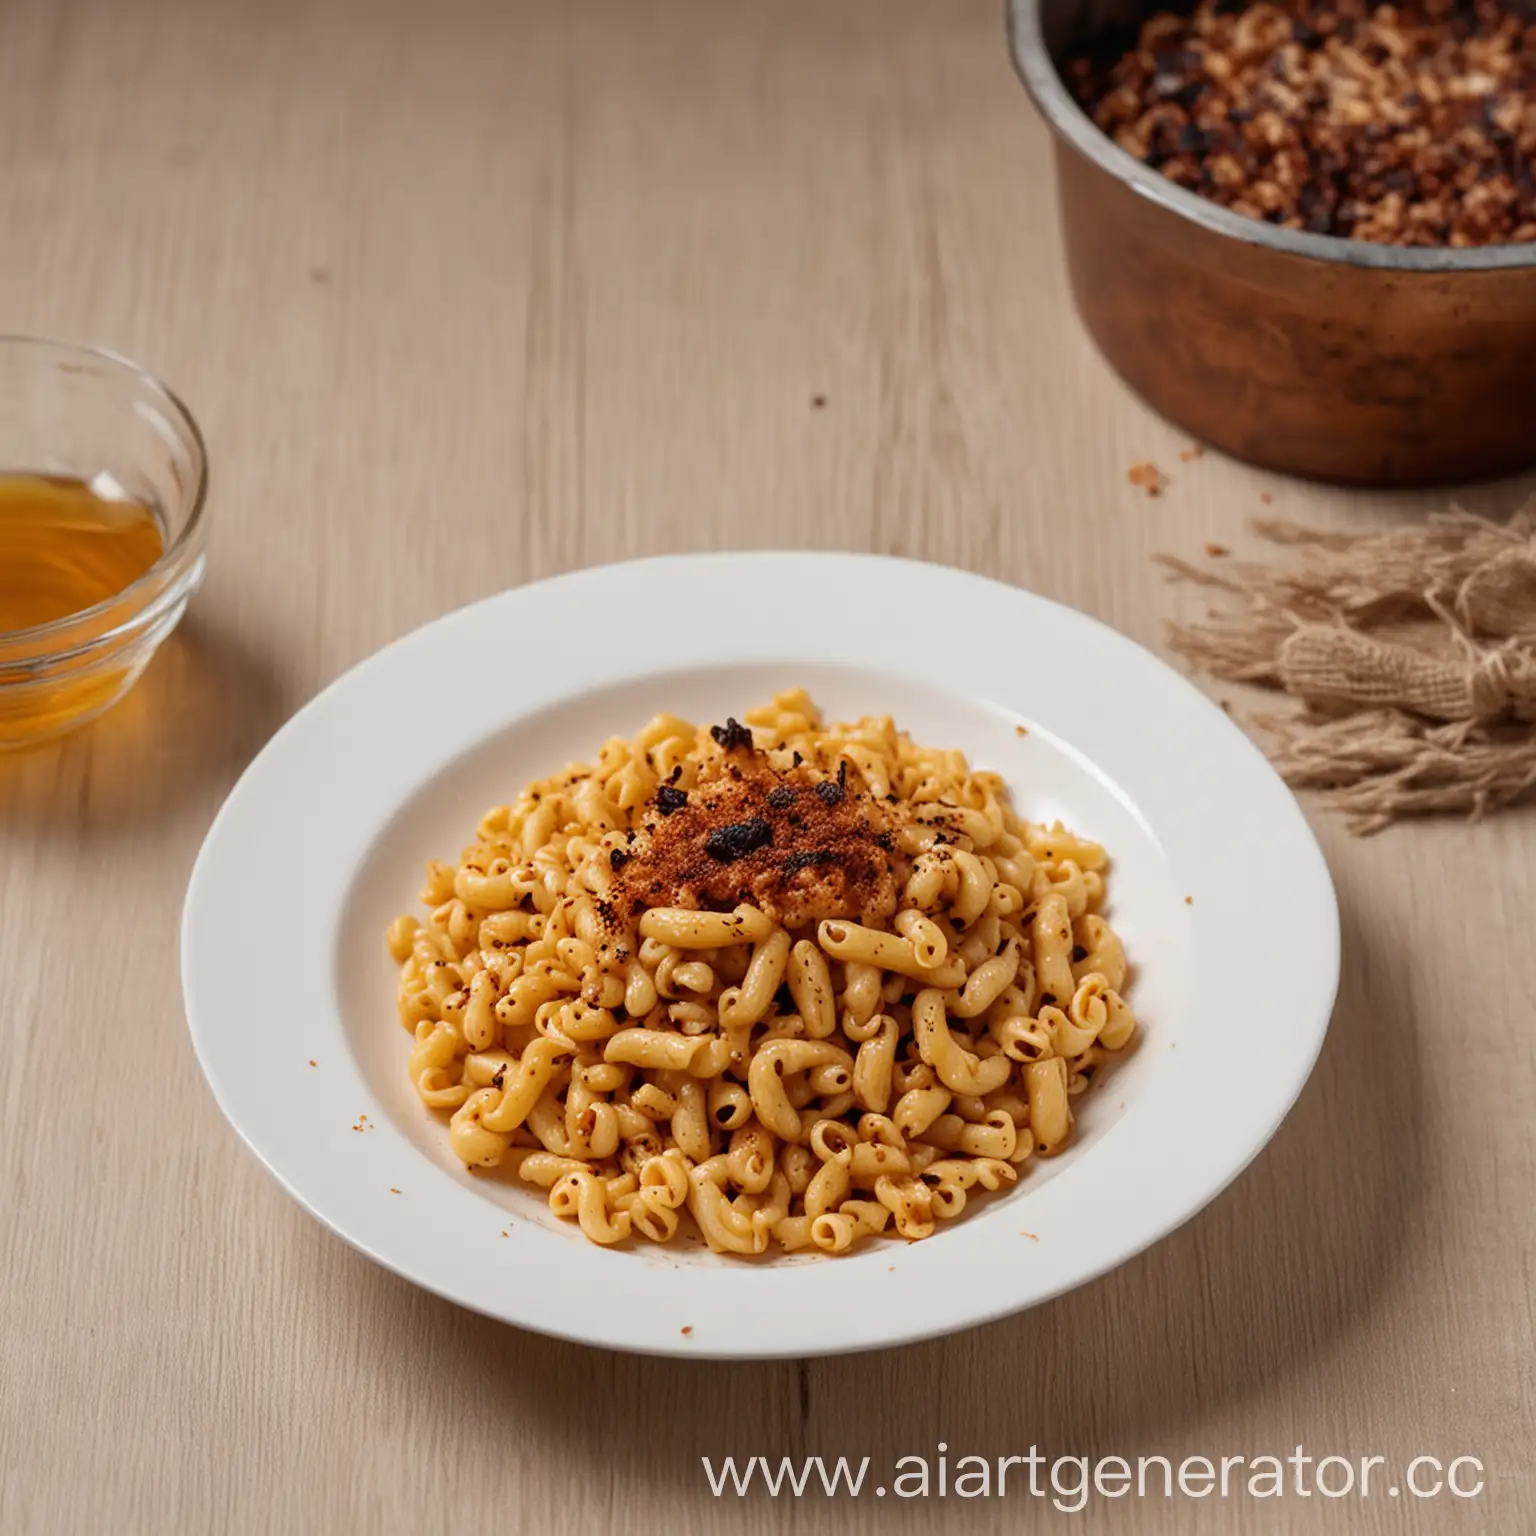 Charred-Macaroni-in-White-Plate-Overcooked-Pasta-Meal-on-Table